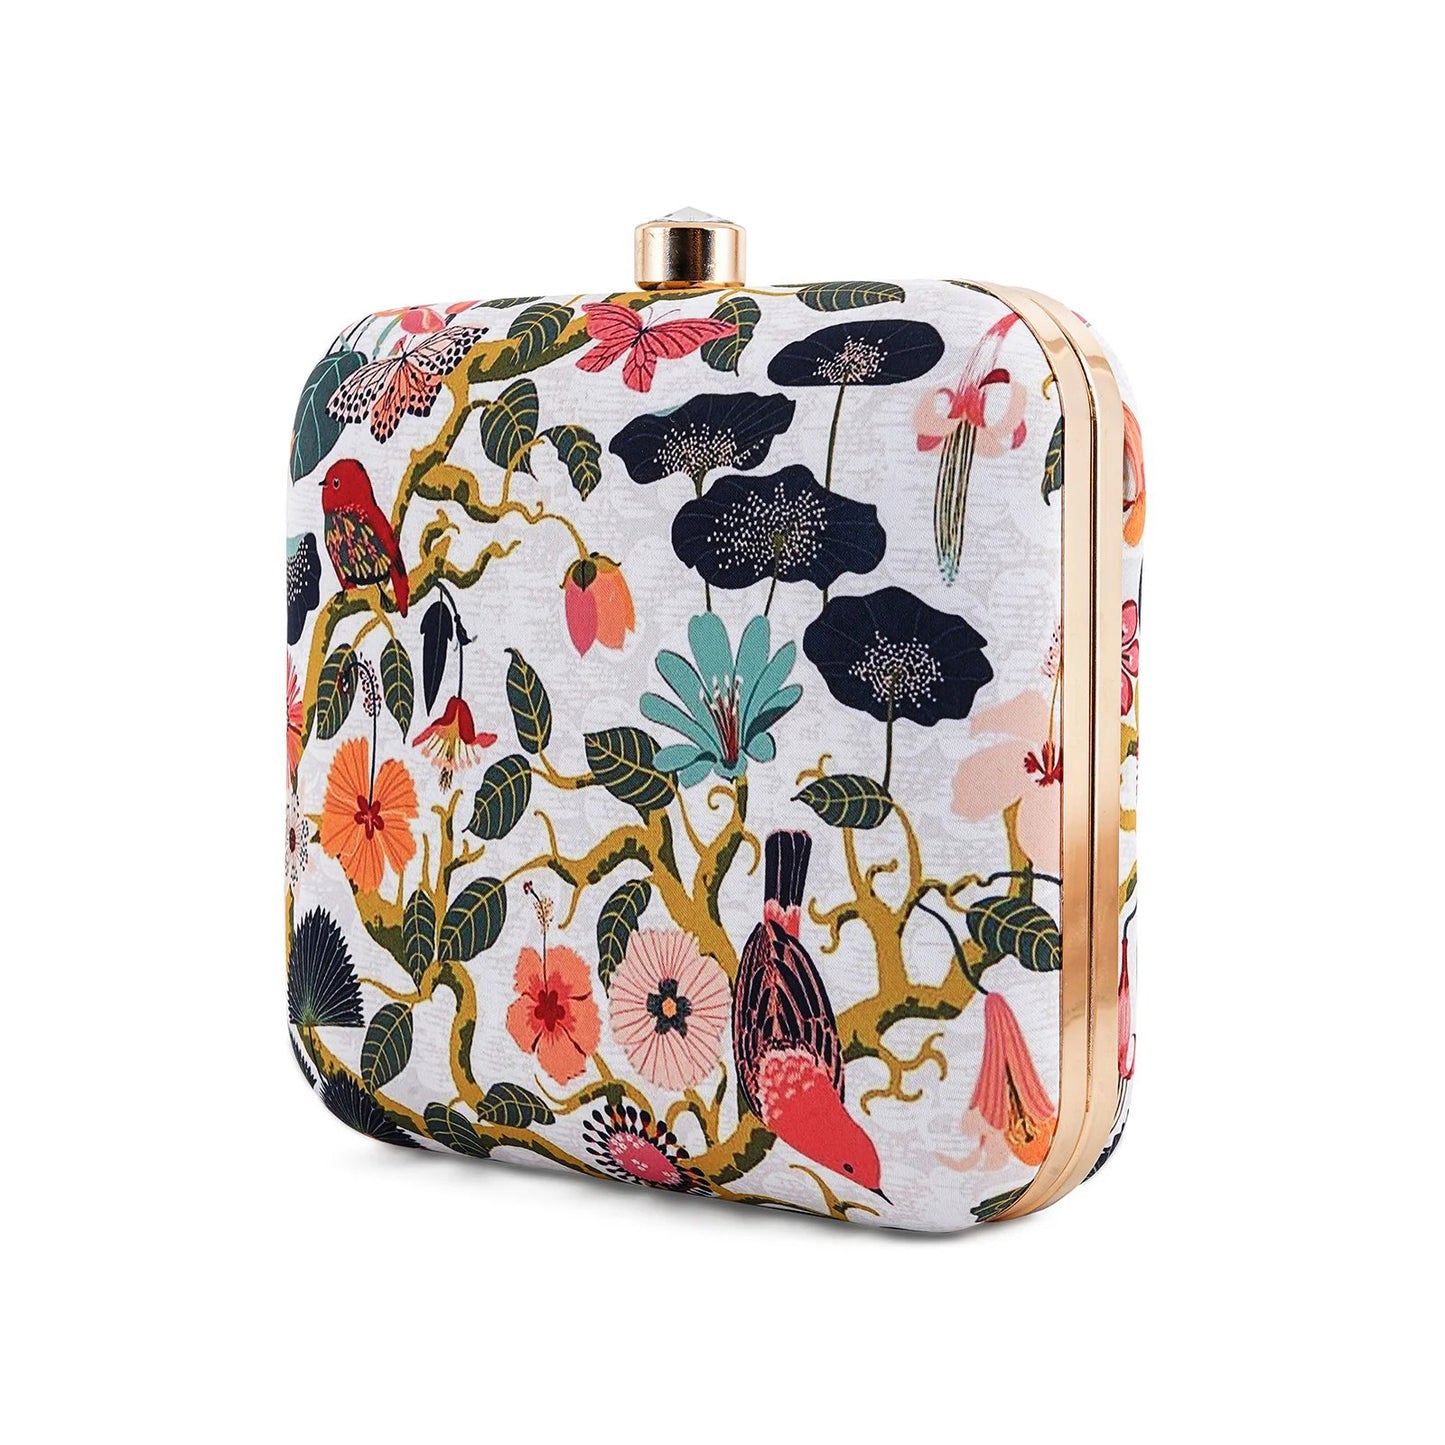 Multicolored Floral Printed Clutch